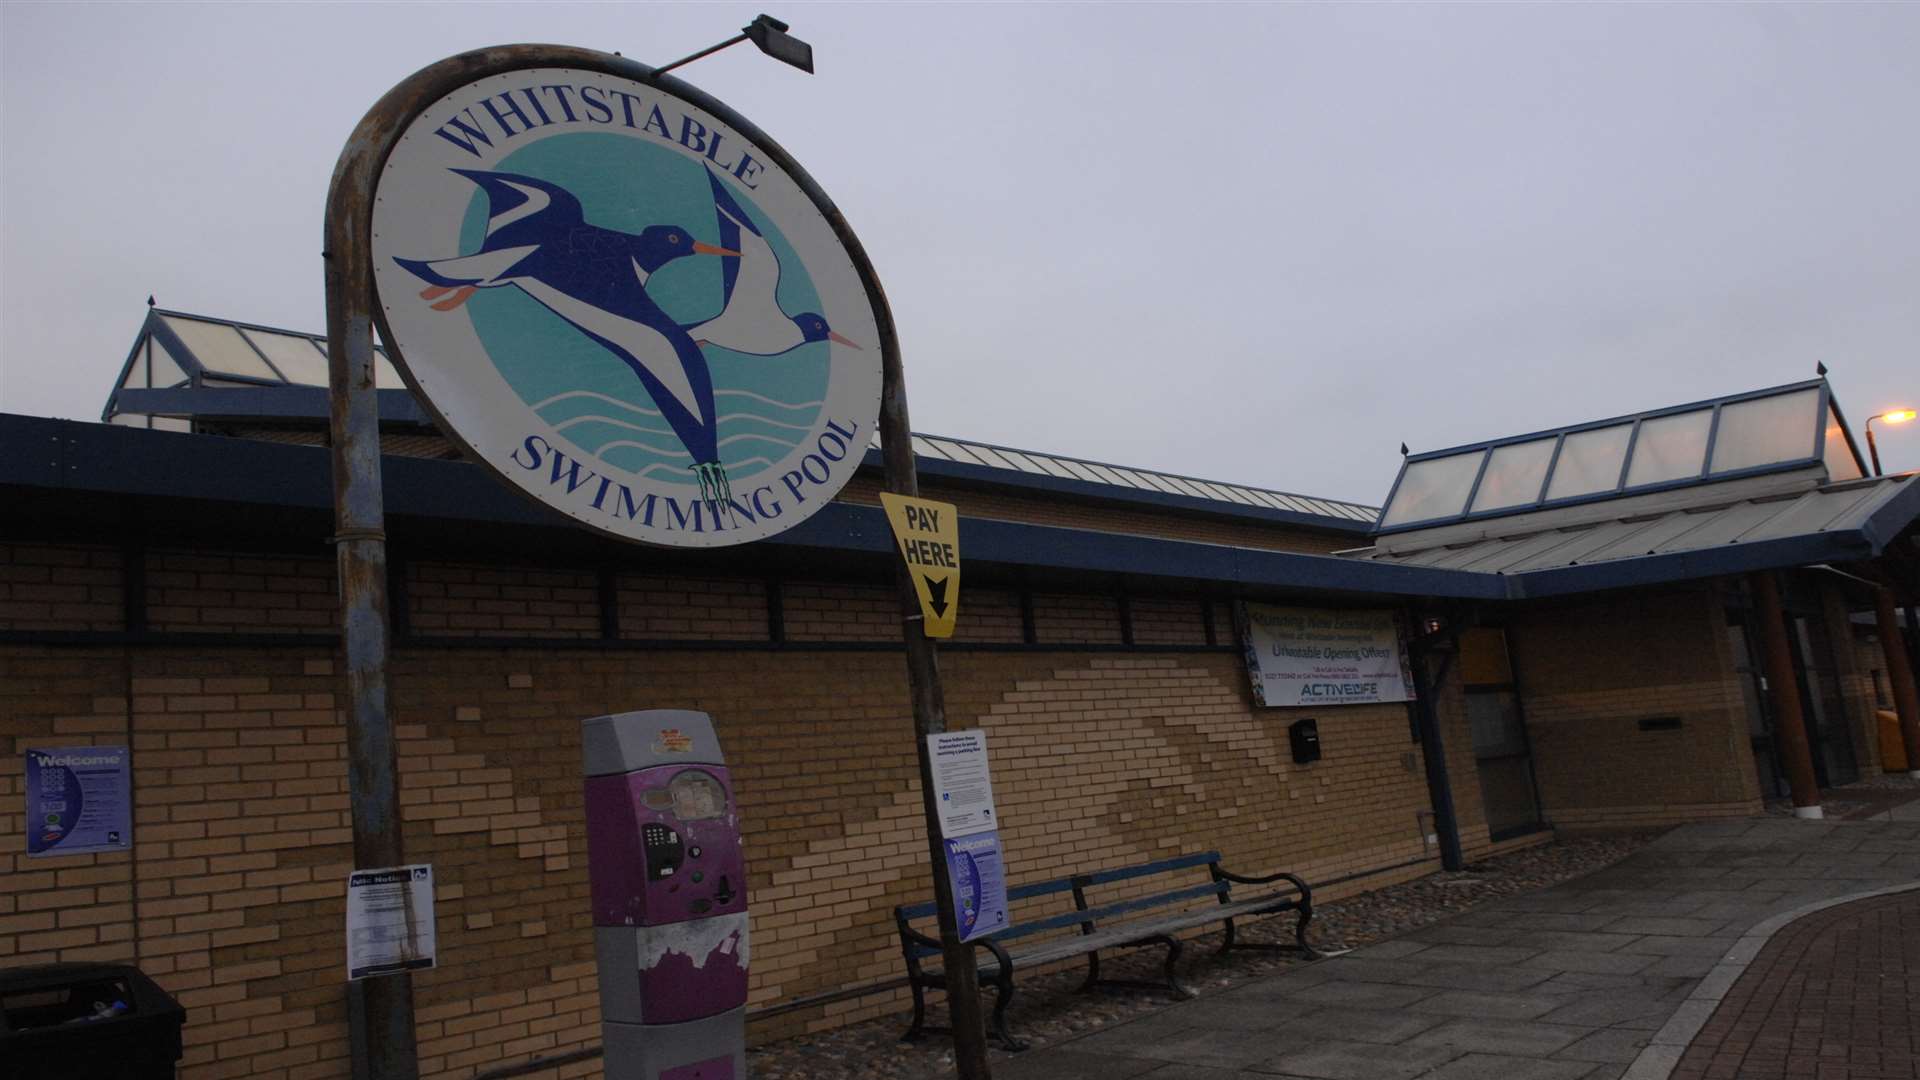 The incident happened at Whitstable Swimming Pool